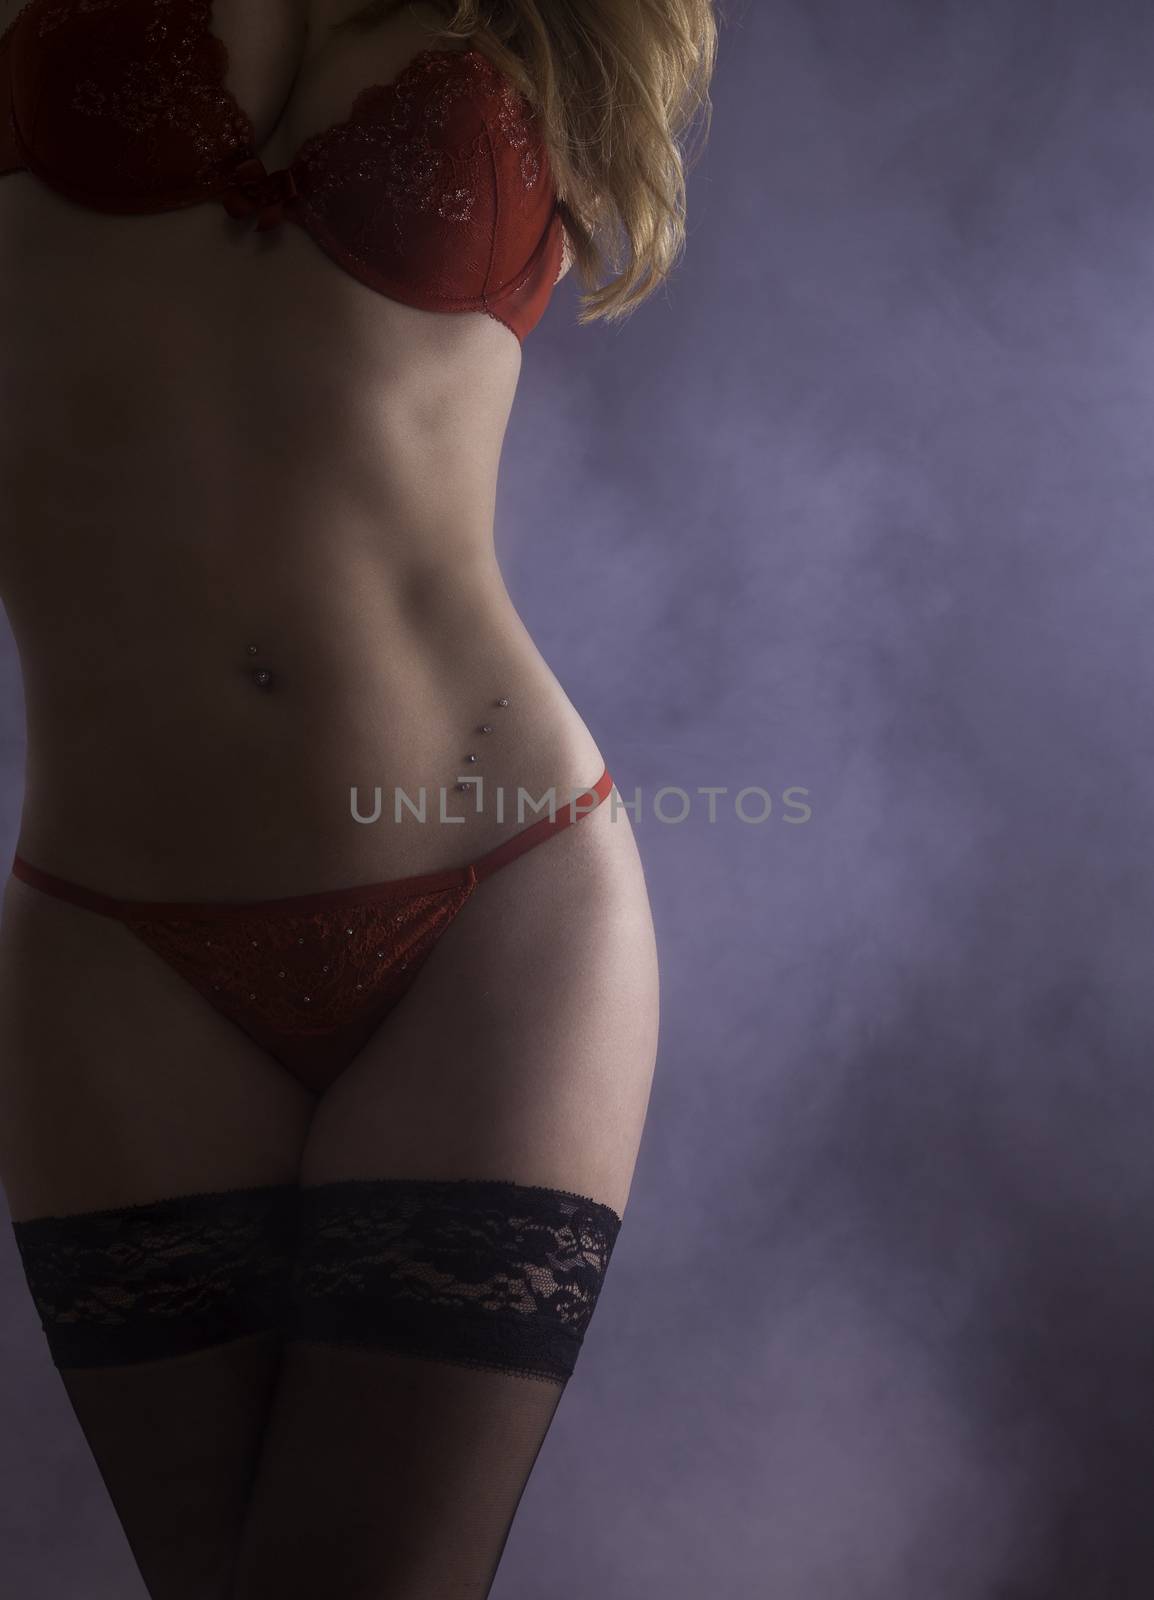 body of a woman in red lingerie and black stockings by 25ehaag6